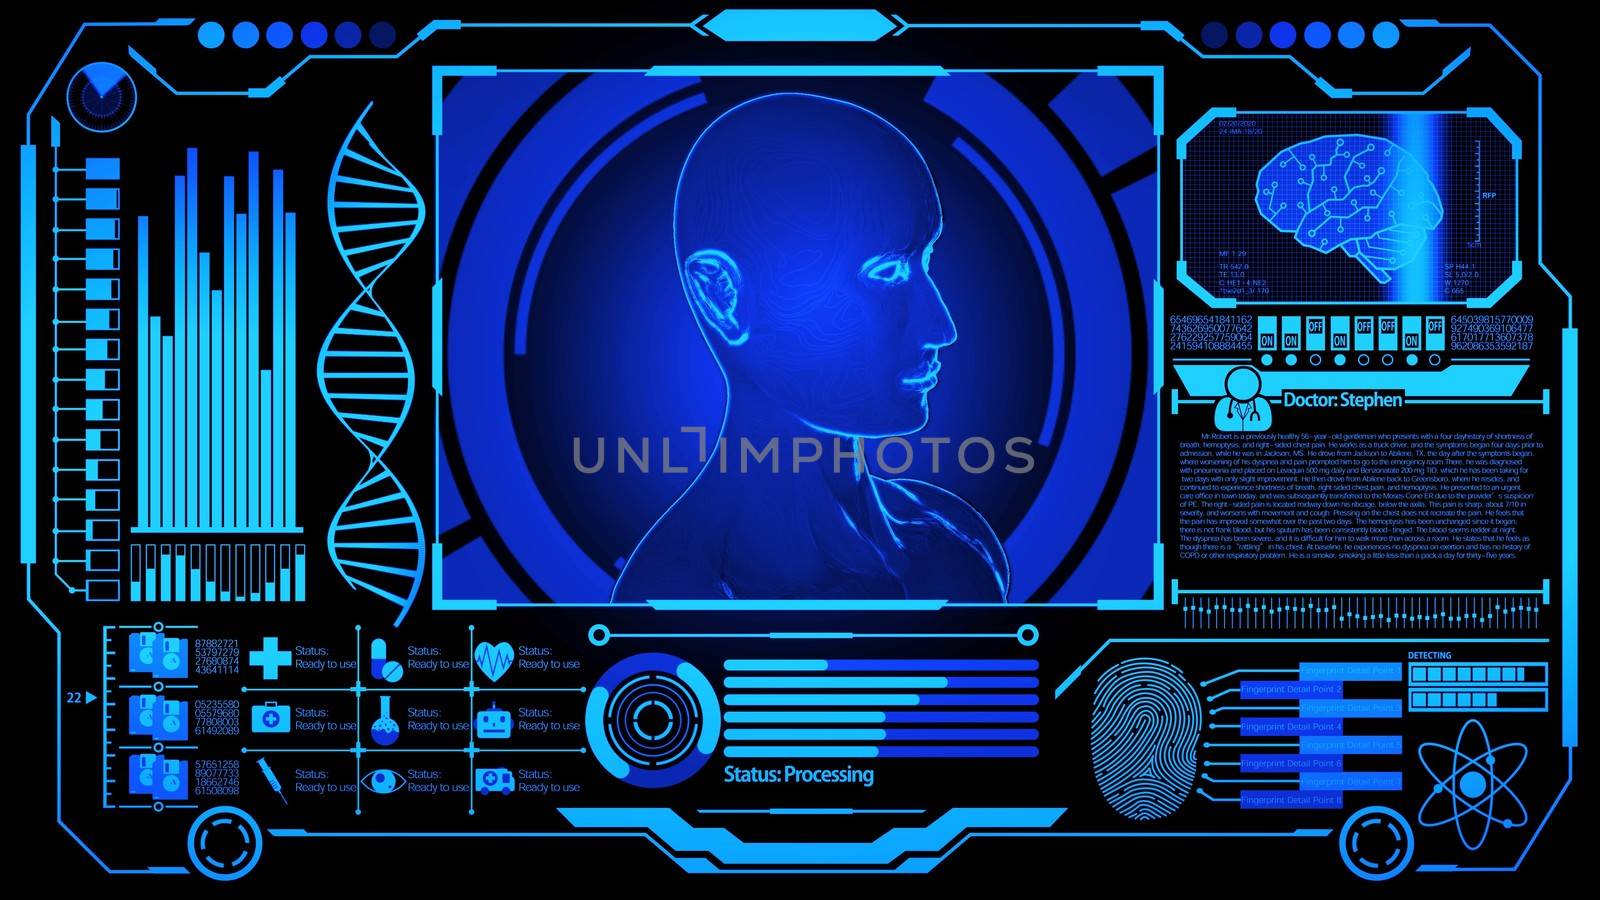 3D Human Head Model Rendering Rotating in Medical Futuristic HUD Display Screen including DNA, Digital Brain Scan, Fingerprint and more with Blue Color Still Image Ver.1 (Full screen) by ariya23156